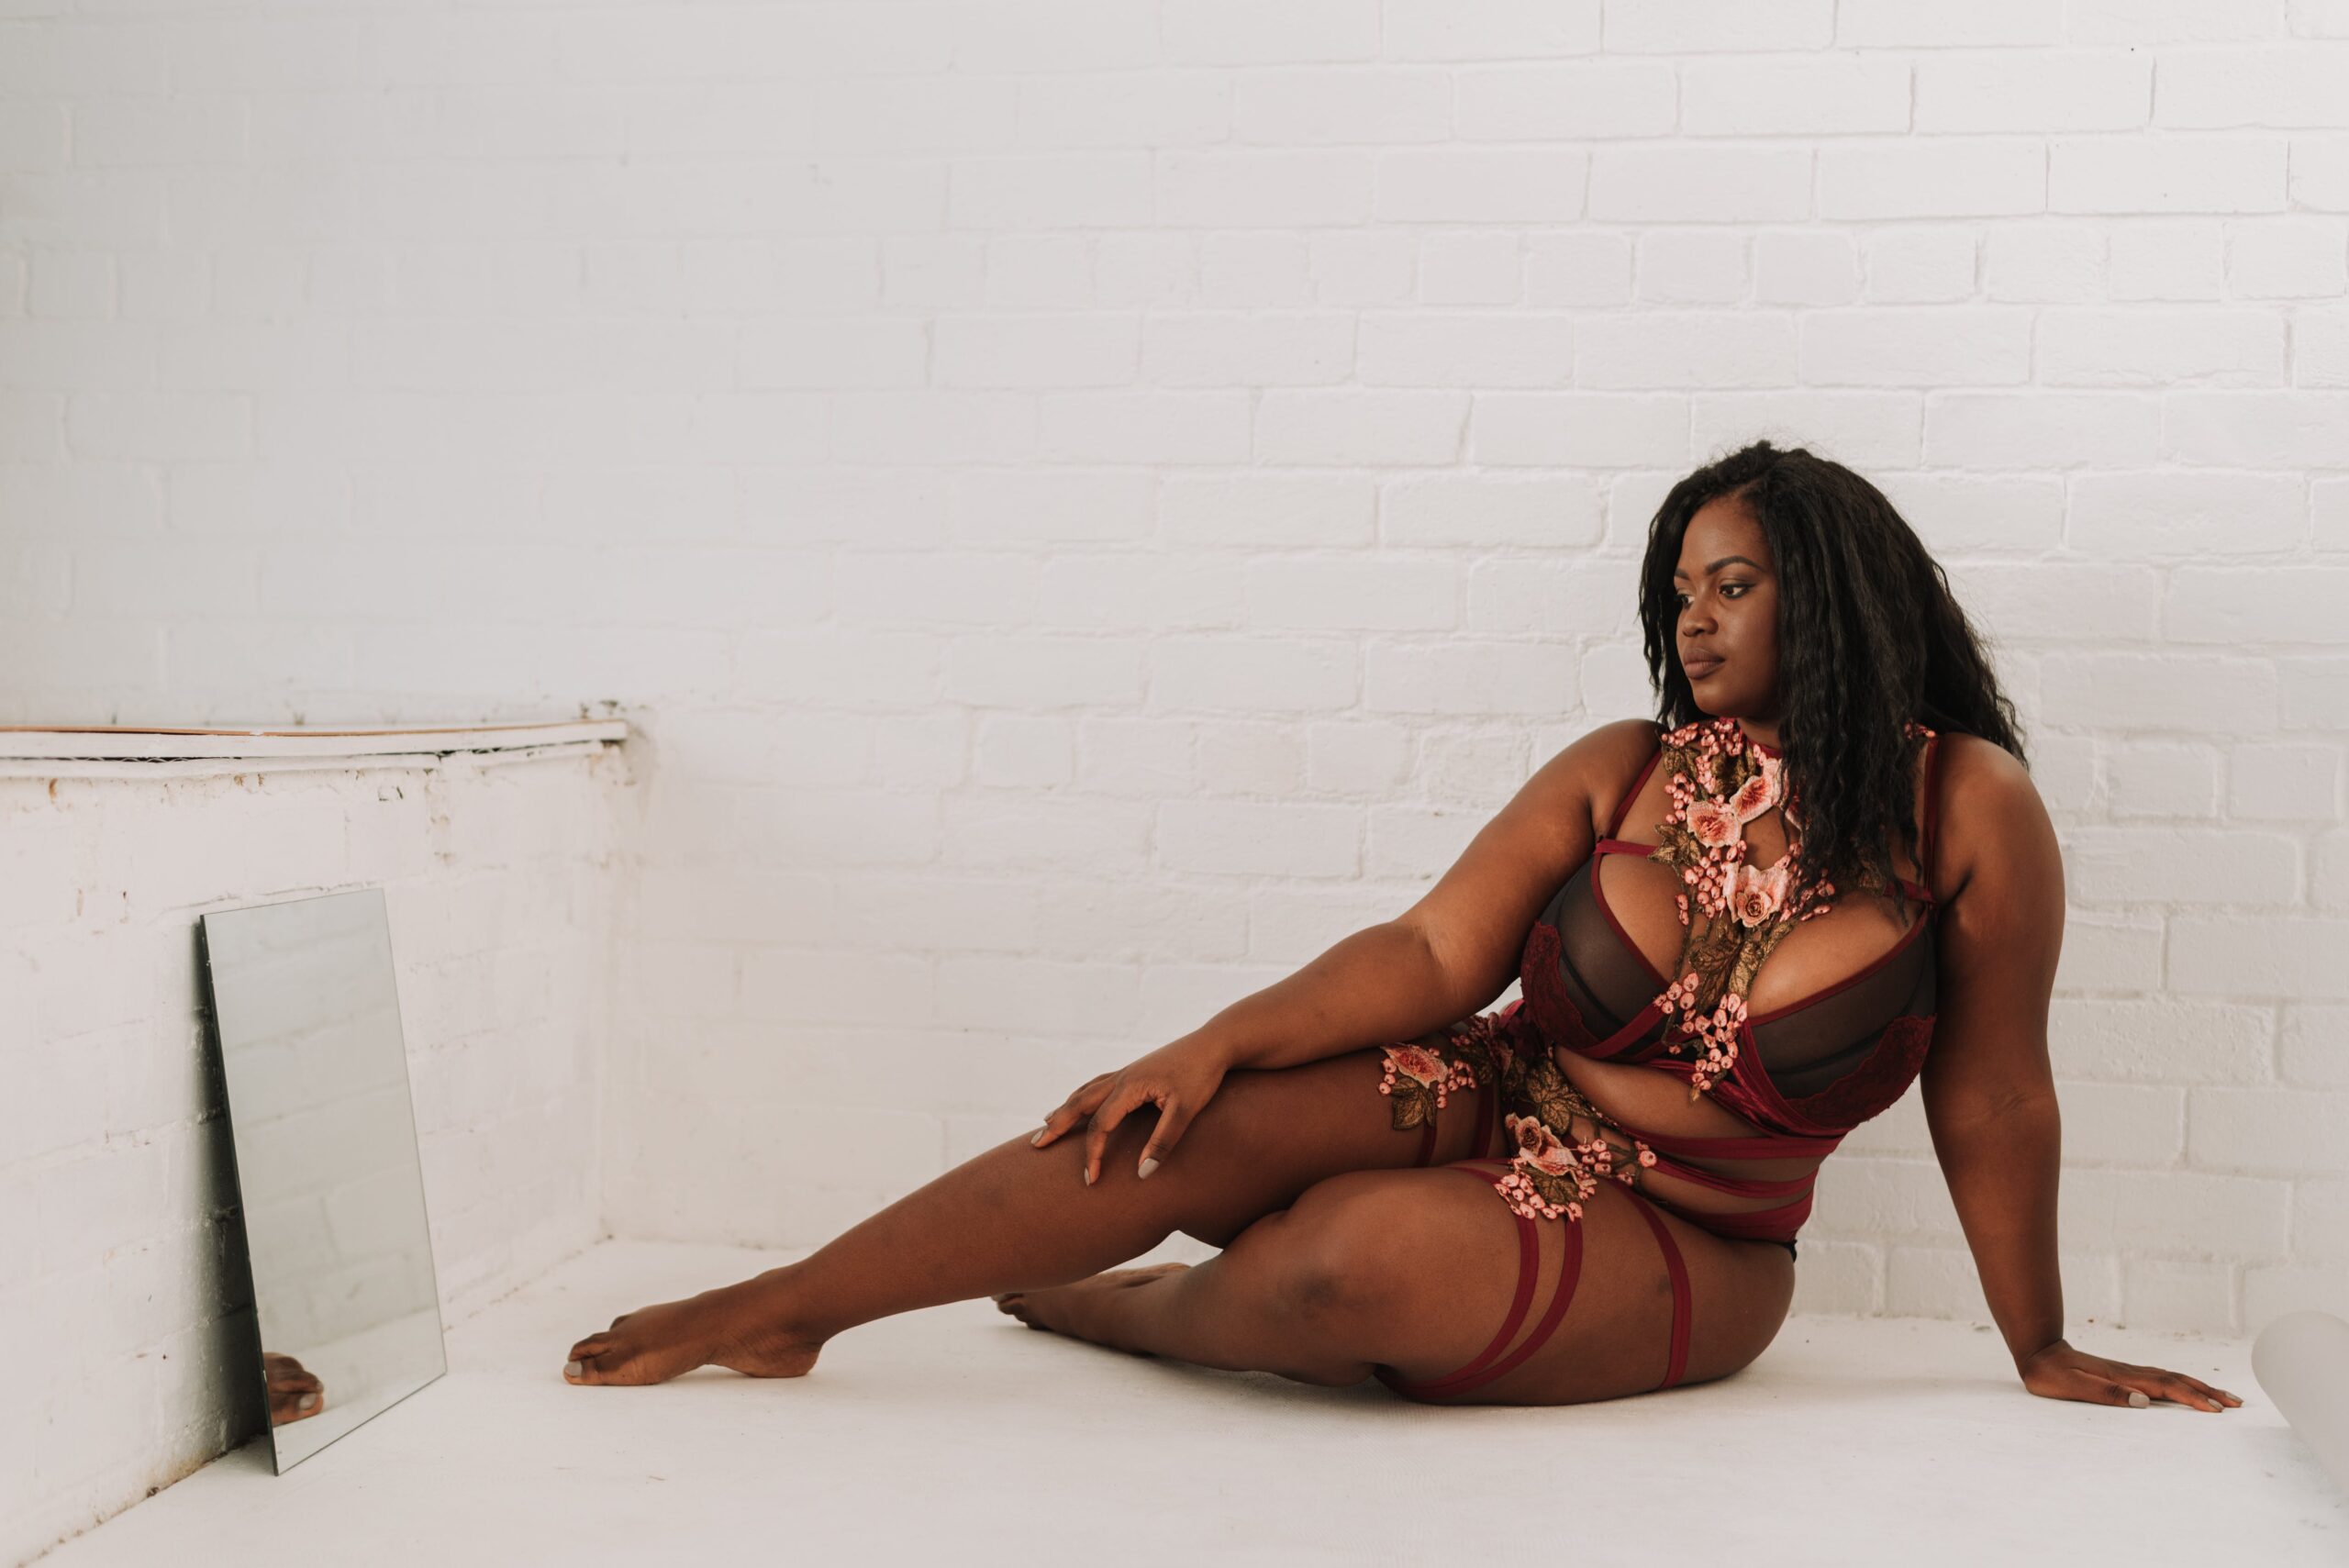 Plus Size Modeling - Some lingerie is just made for curvy girls 🥰